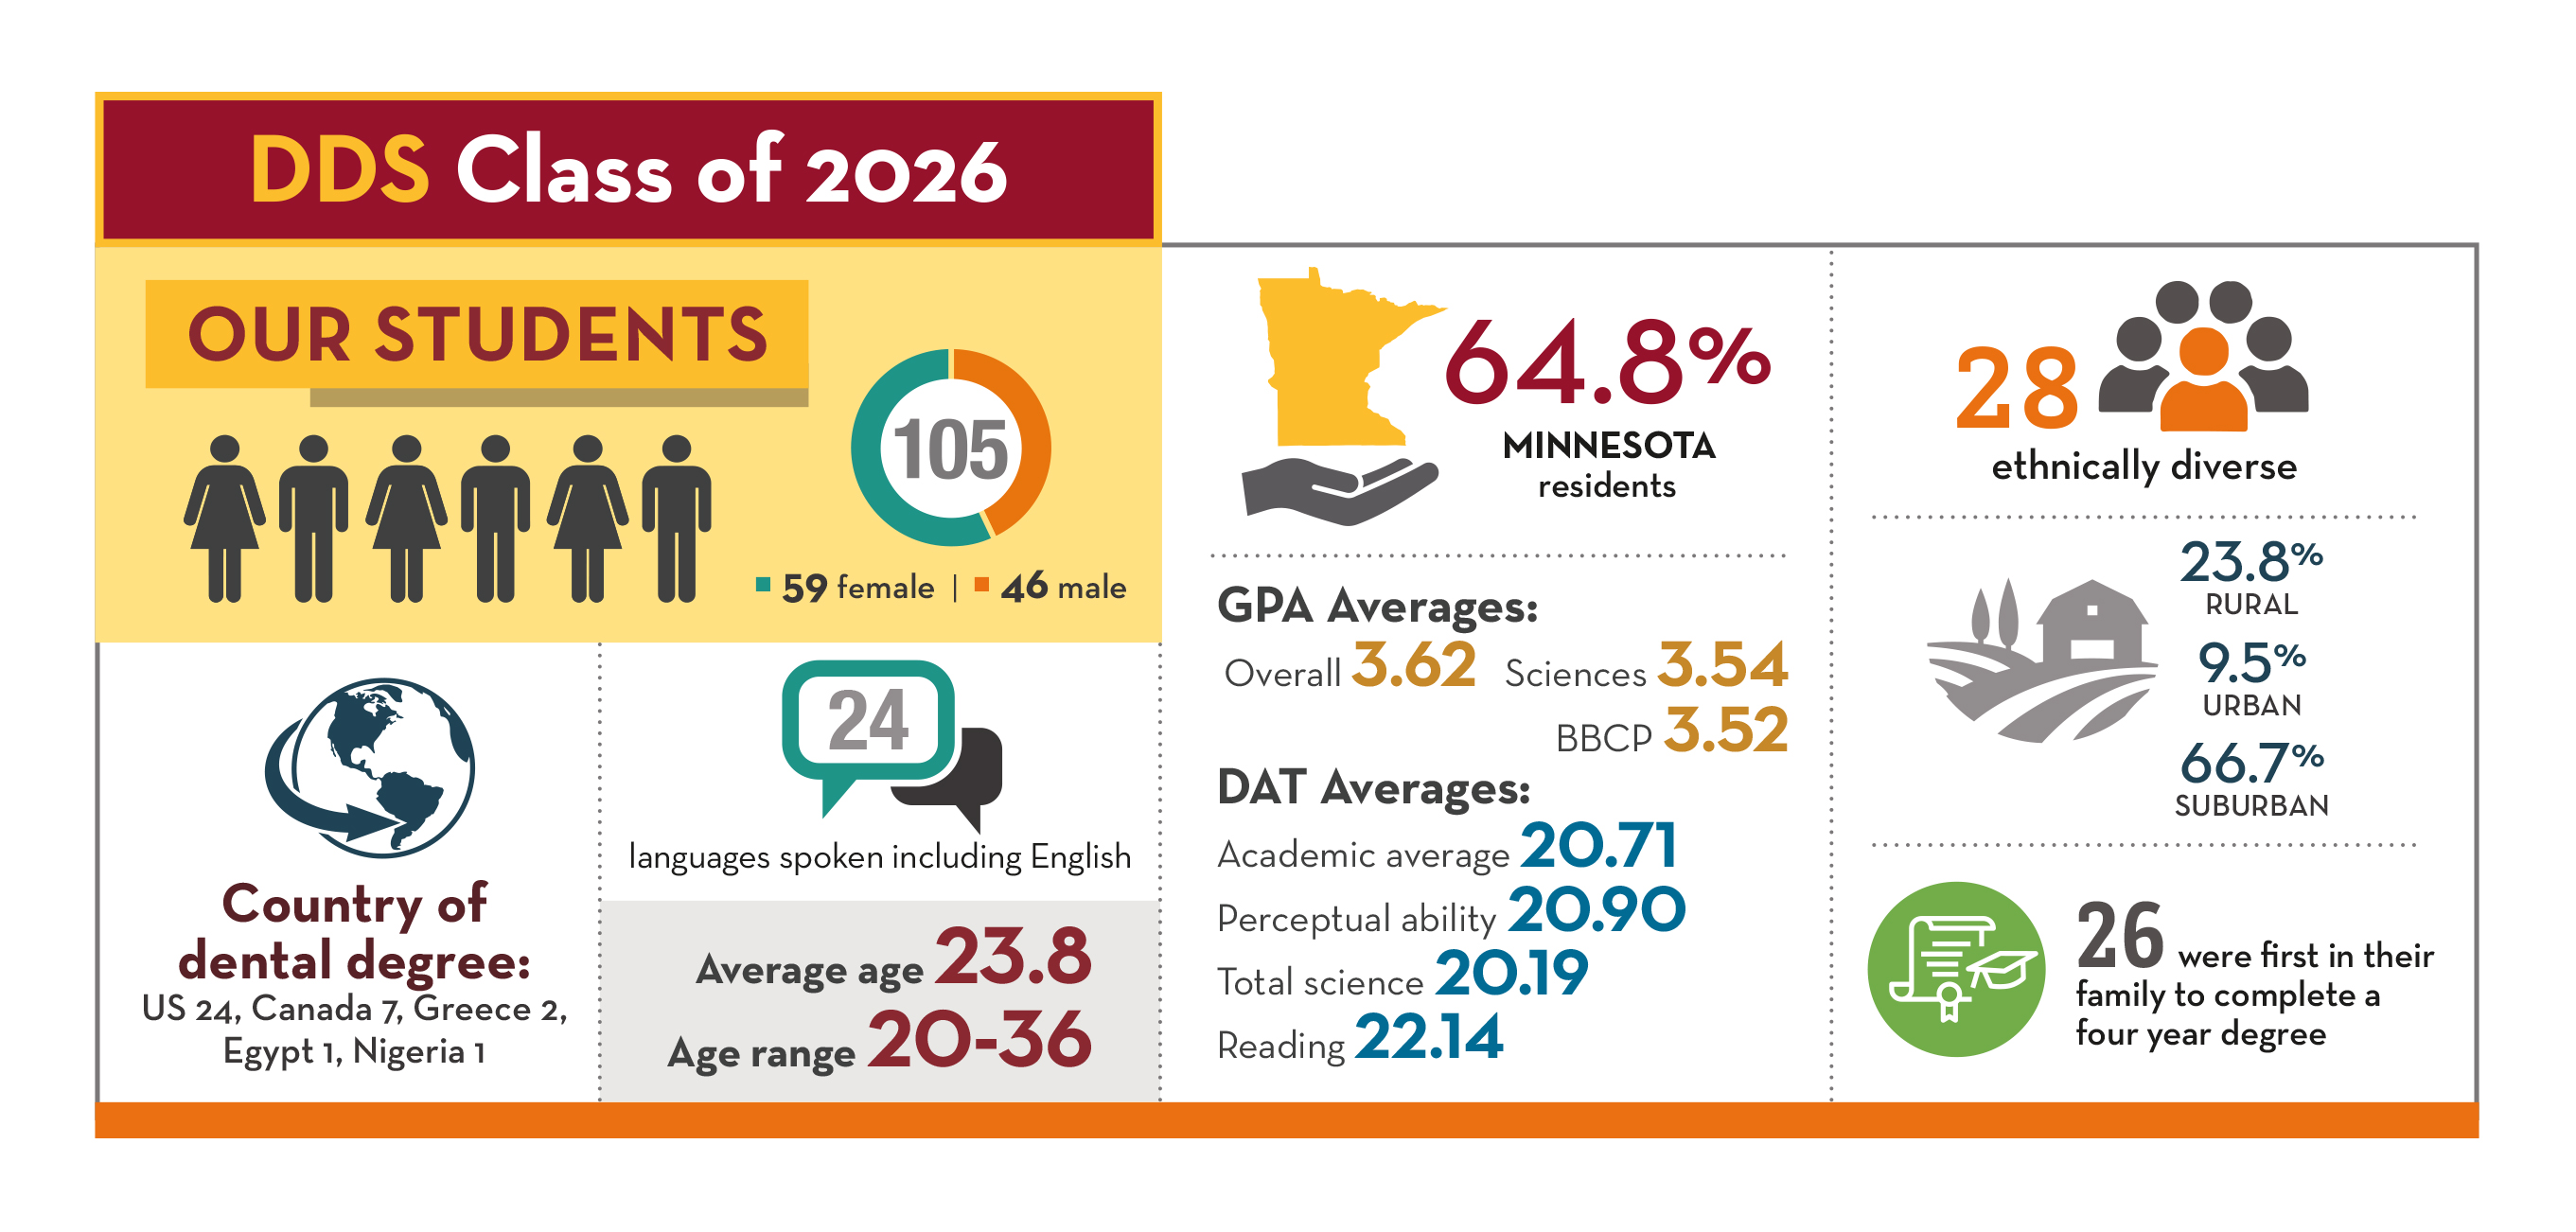 DDS Class of 2026 - 105 students, 59 female, 46 male. 64.8% are minnesota residents, 28 ethnically diverse, 3.62 GPA average, 20.81 DAT academic average, 23.8% rural, 26 were first in their family to complete a first-year degree, 24 languages spoken including english, age range 20 to 36 with an average age of 23.8